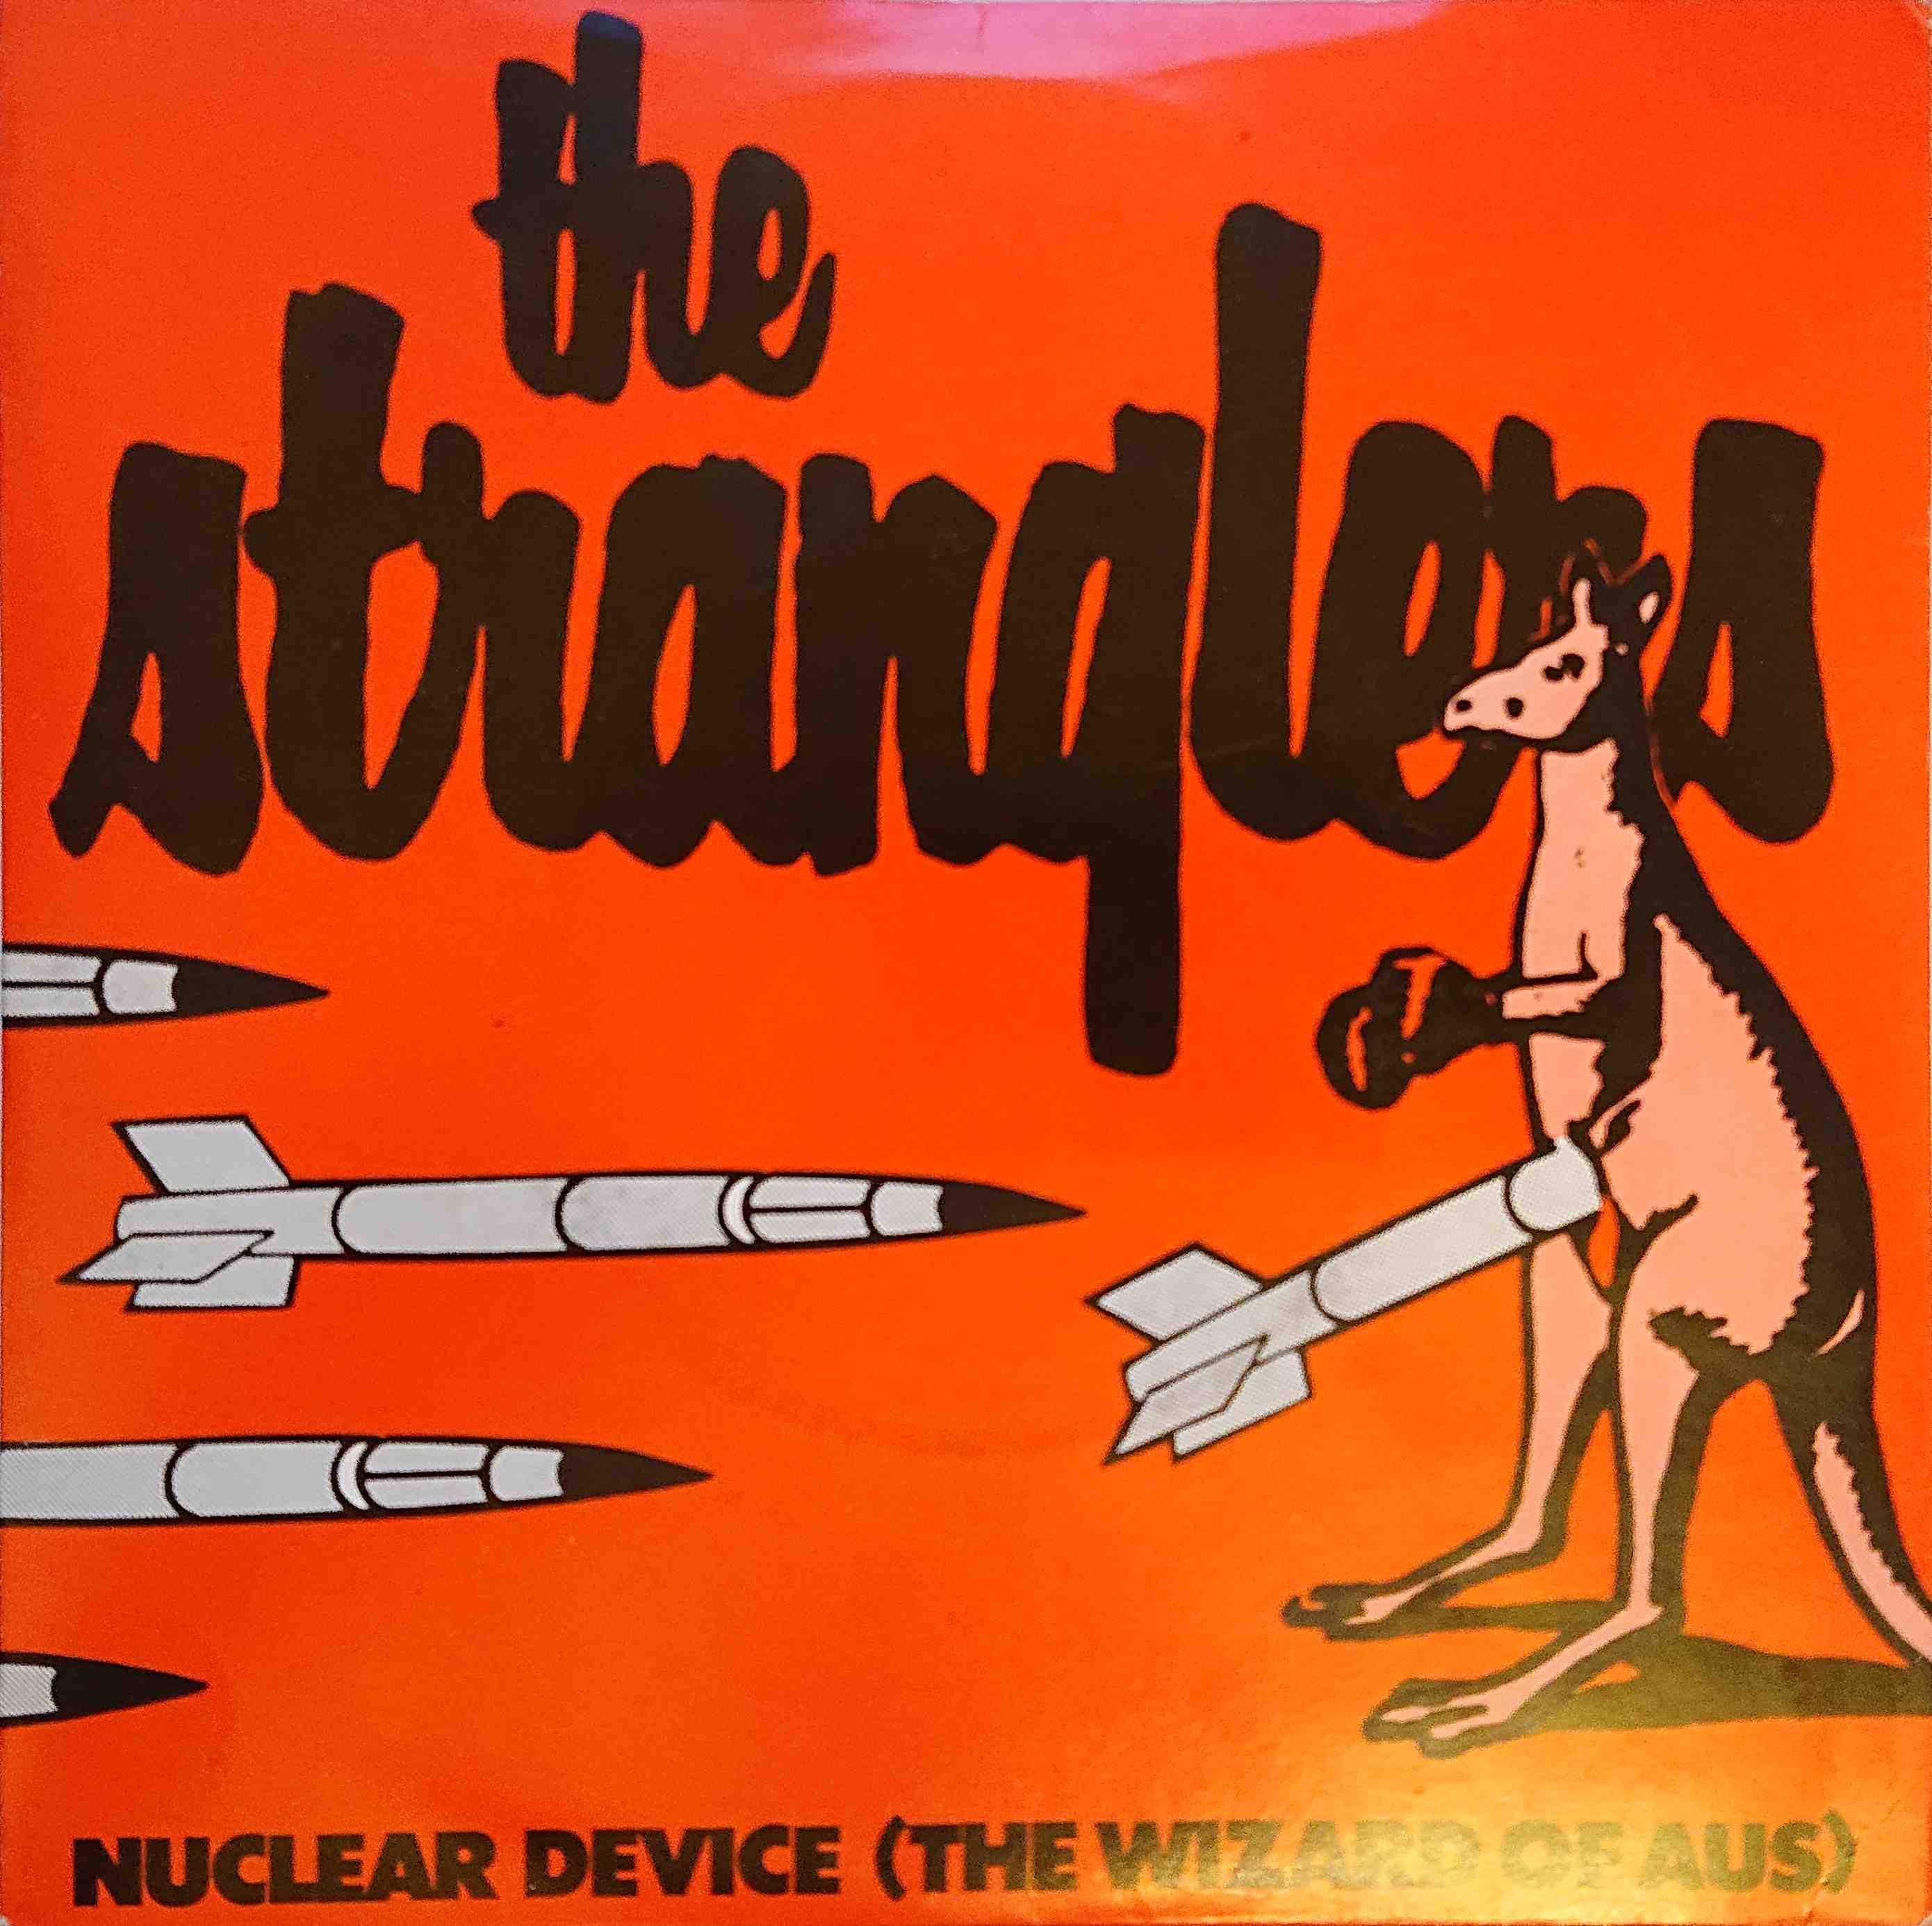 Picture of Nuclear device (The wizard of Aus) by artist The Stranglers from The Stranglers singles